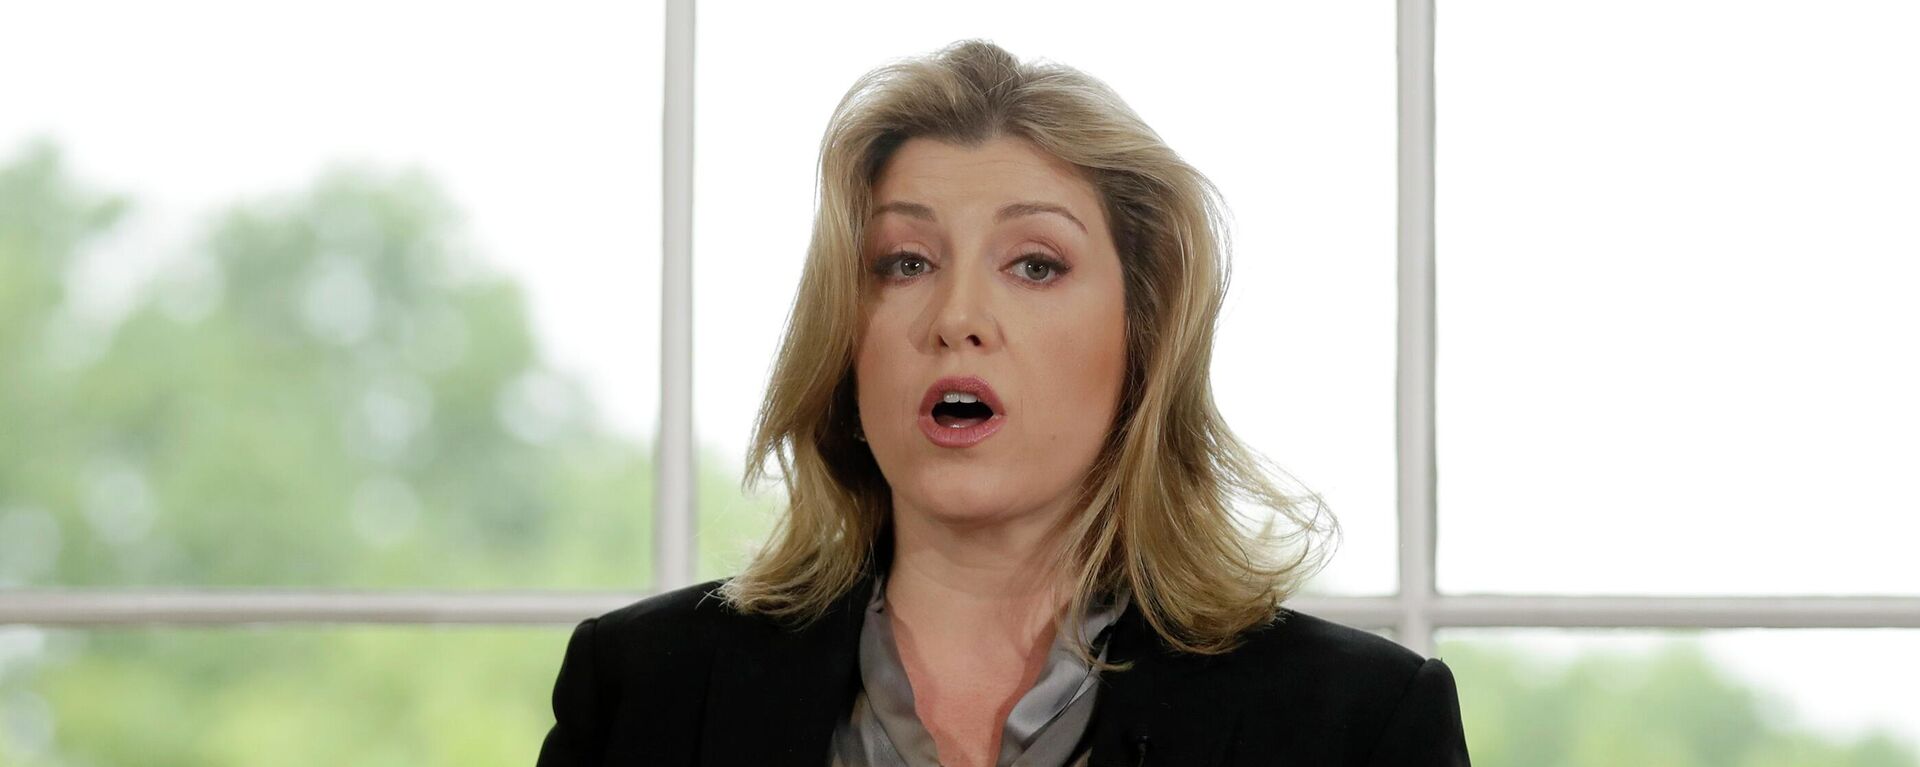 Penny Mordaunt speaks ahead of Foreign Secretary Jeremy Hunt launching his leadership campaign for the Conservative Party in London, June 10, 2019 - Sputnik International, 1920, 08.07.2022